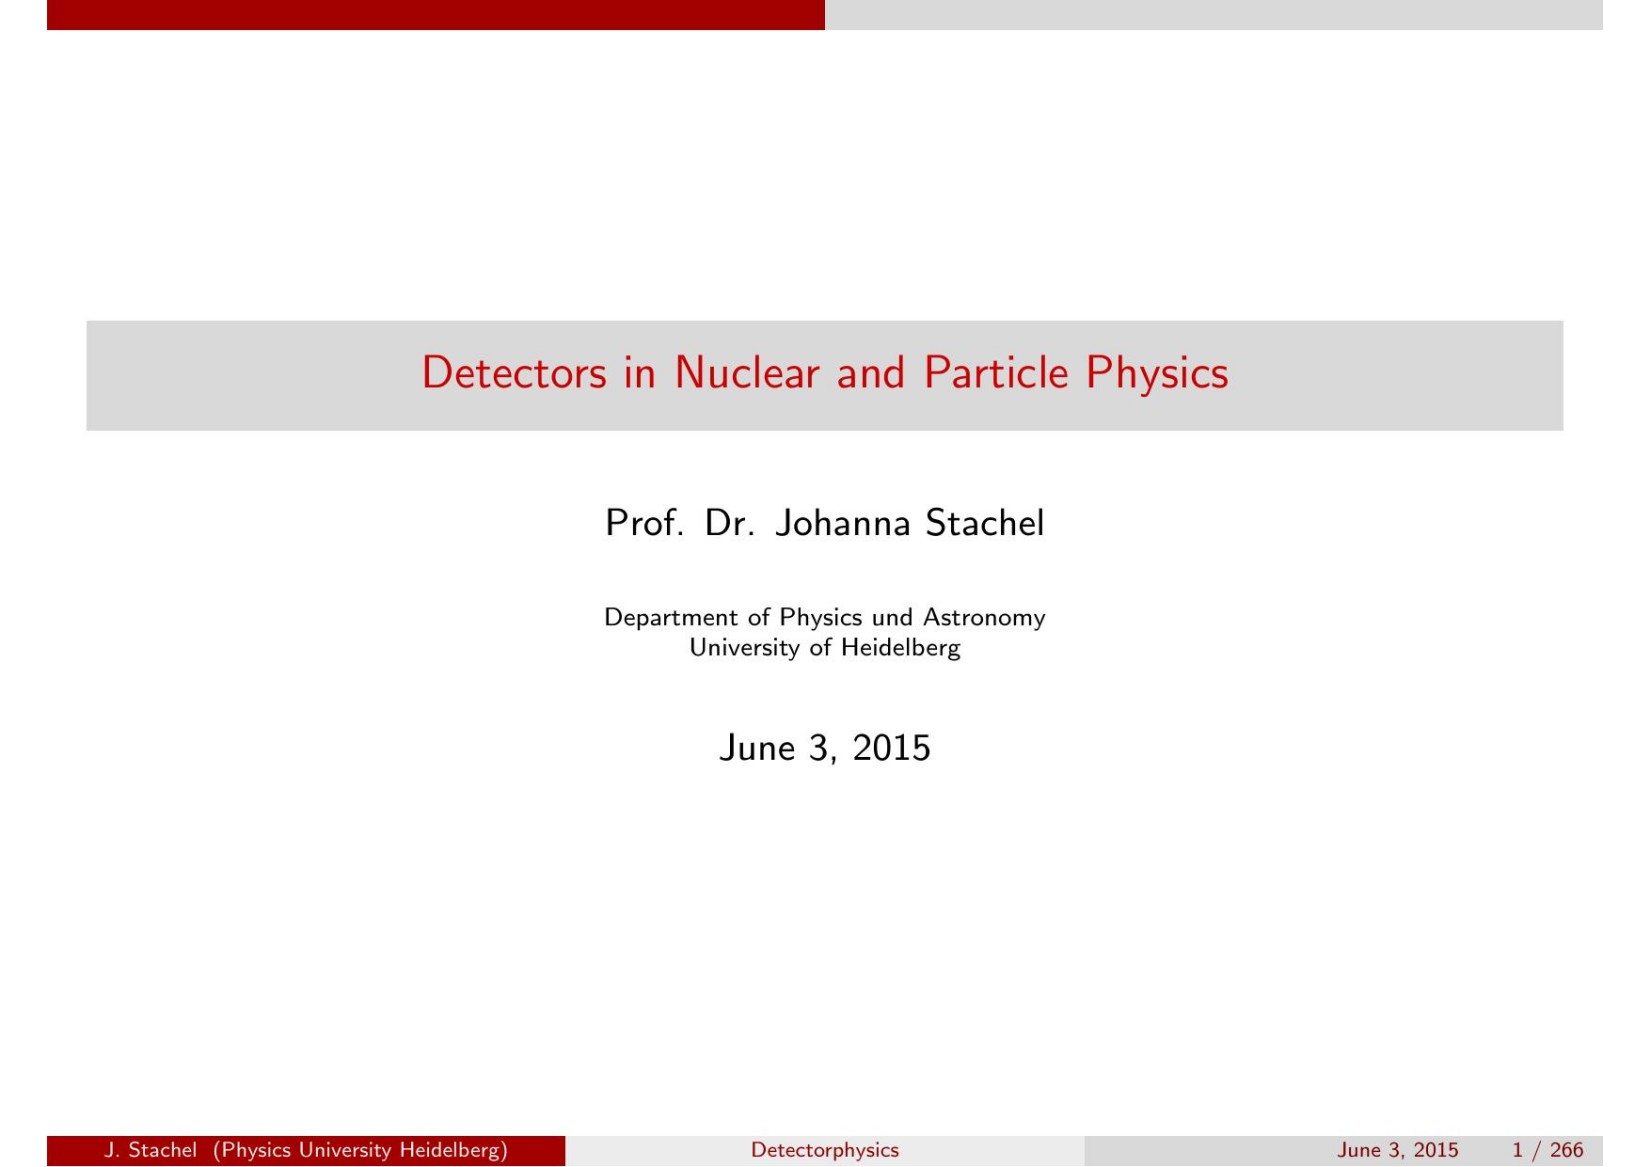 Detectors in Nuclear and Particle Physics